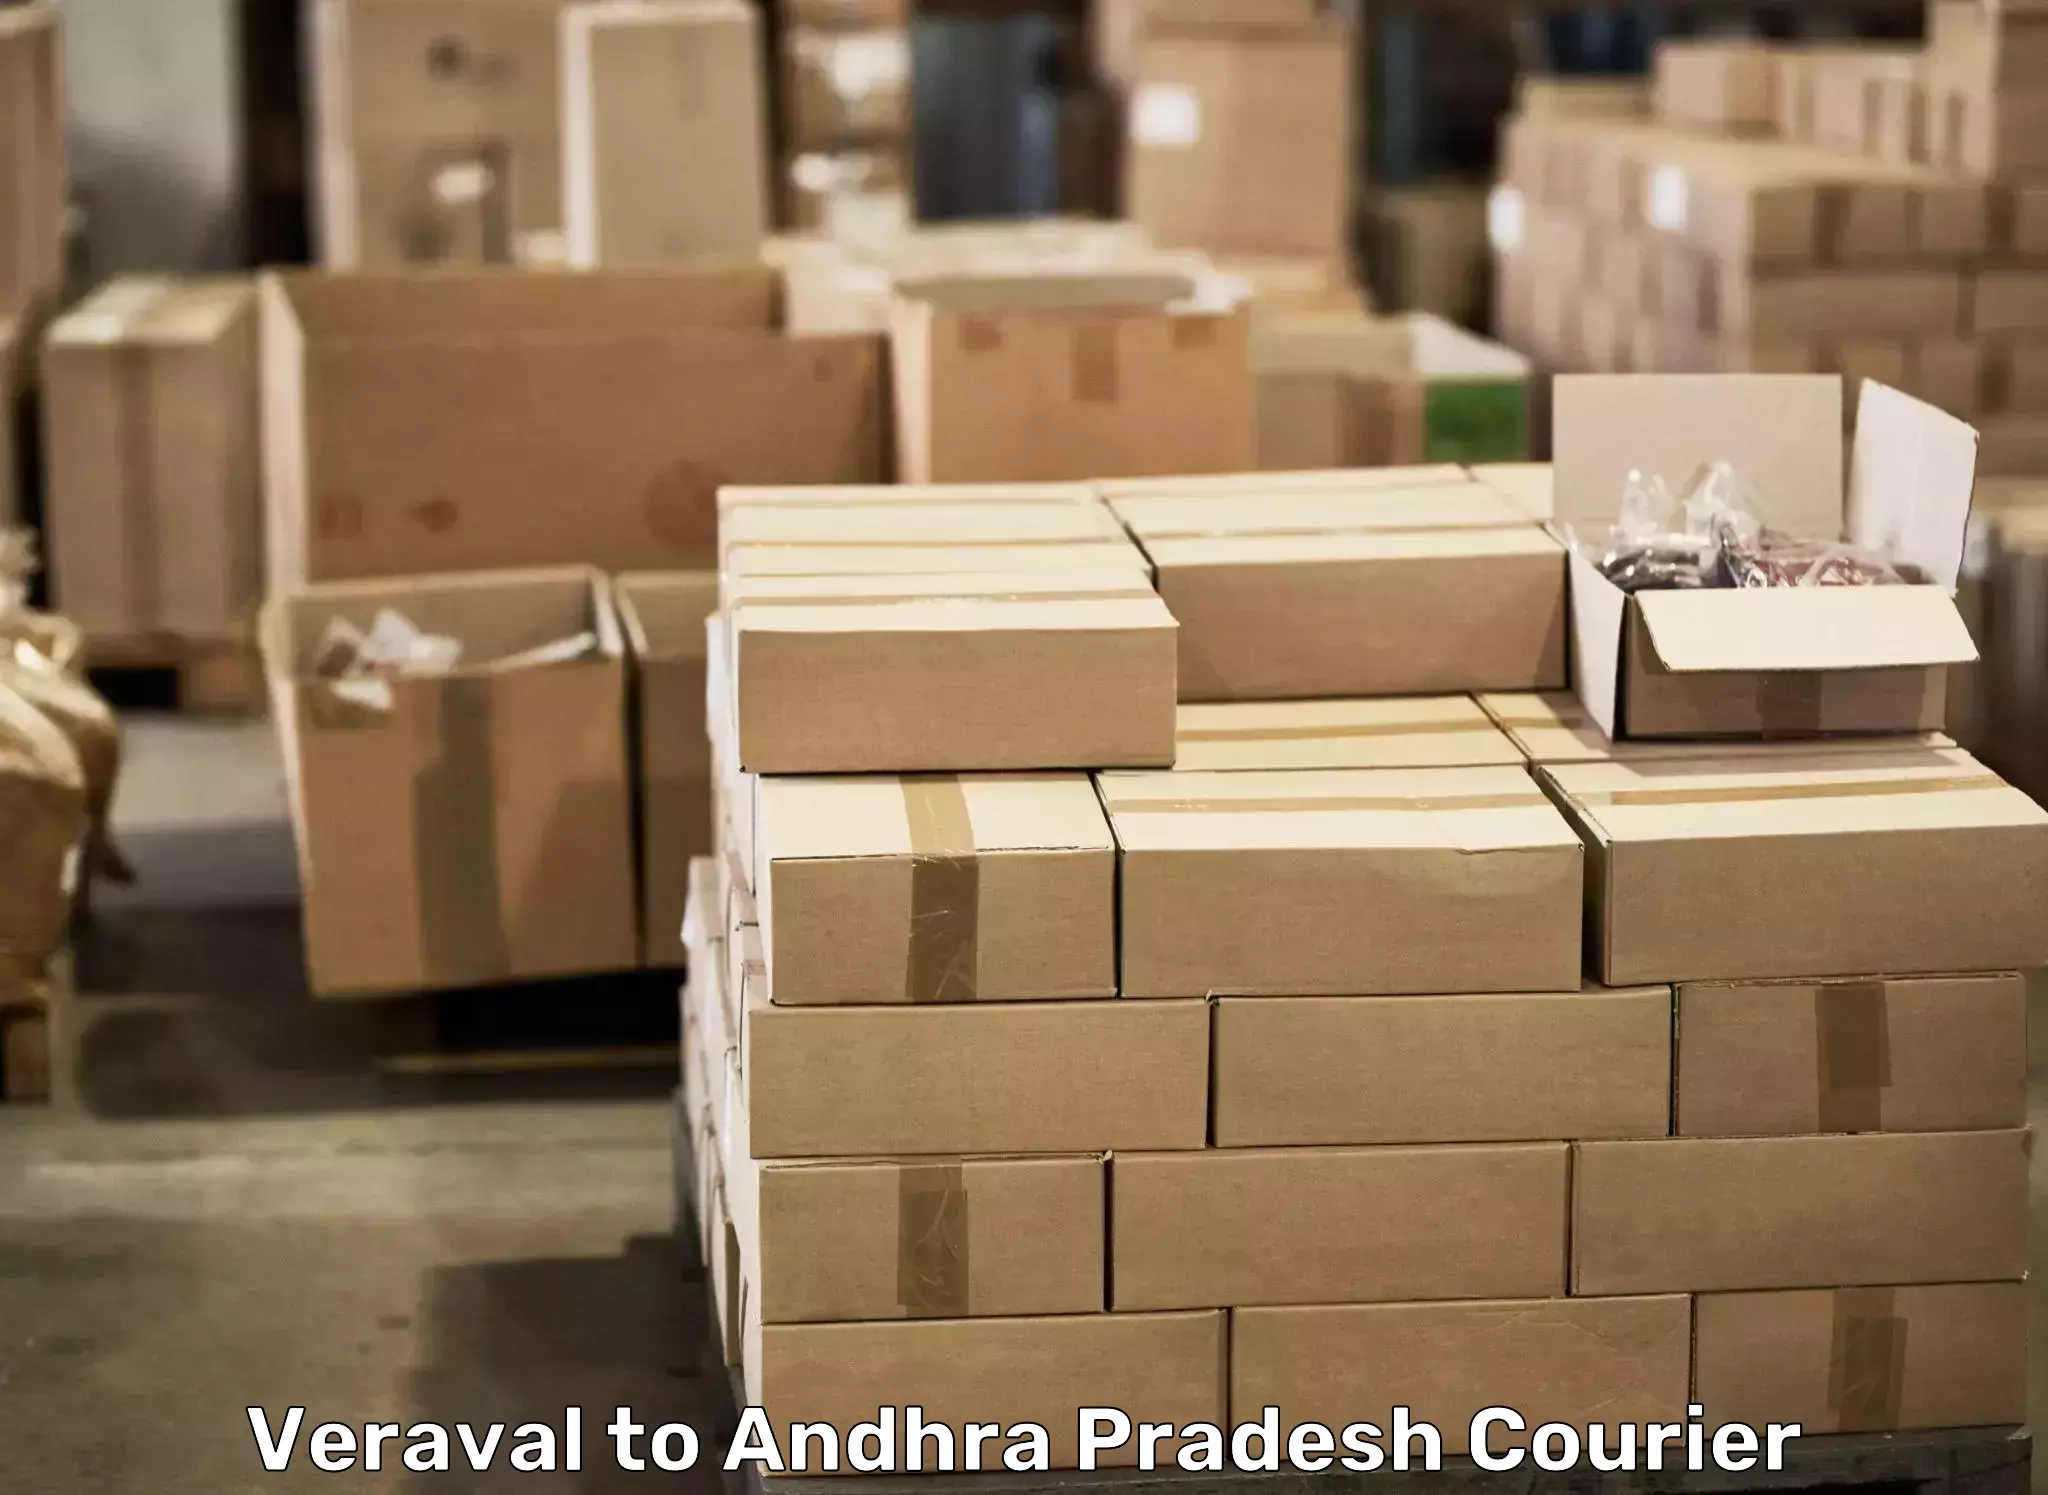 Full-service movers Veraval to Visakhapatnam